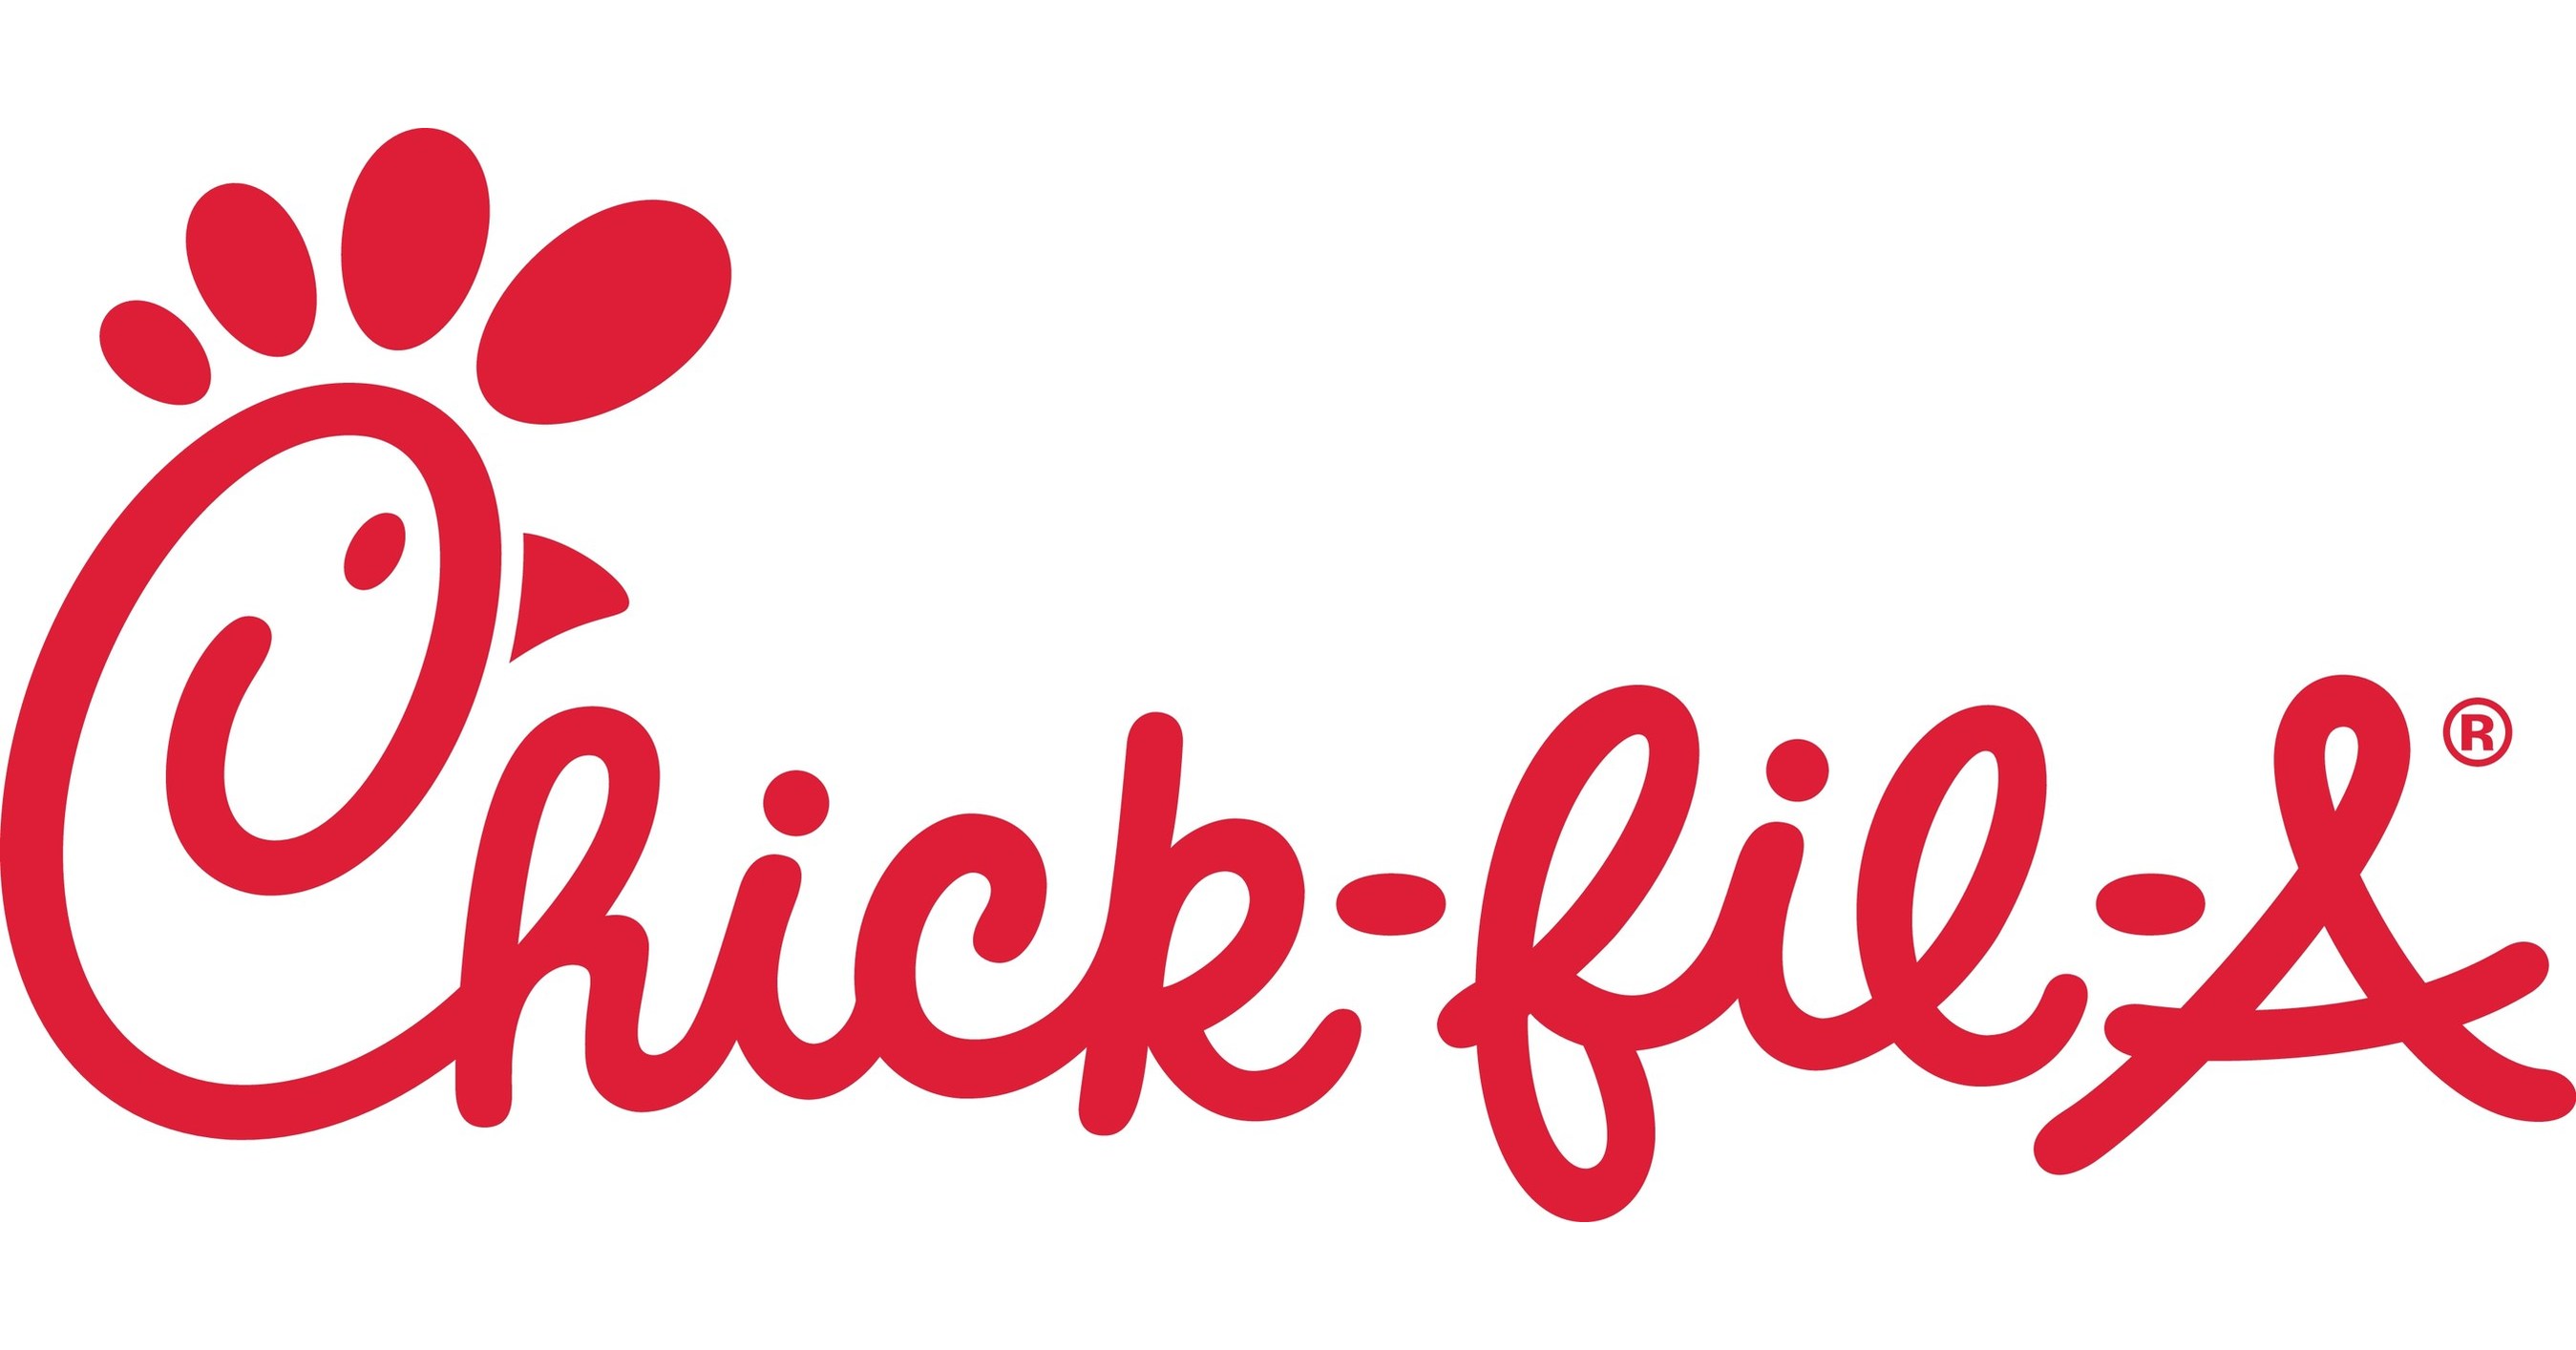 Personalization Chick fil A Merry Christmas 2023 Chick fil A Gift